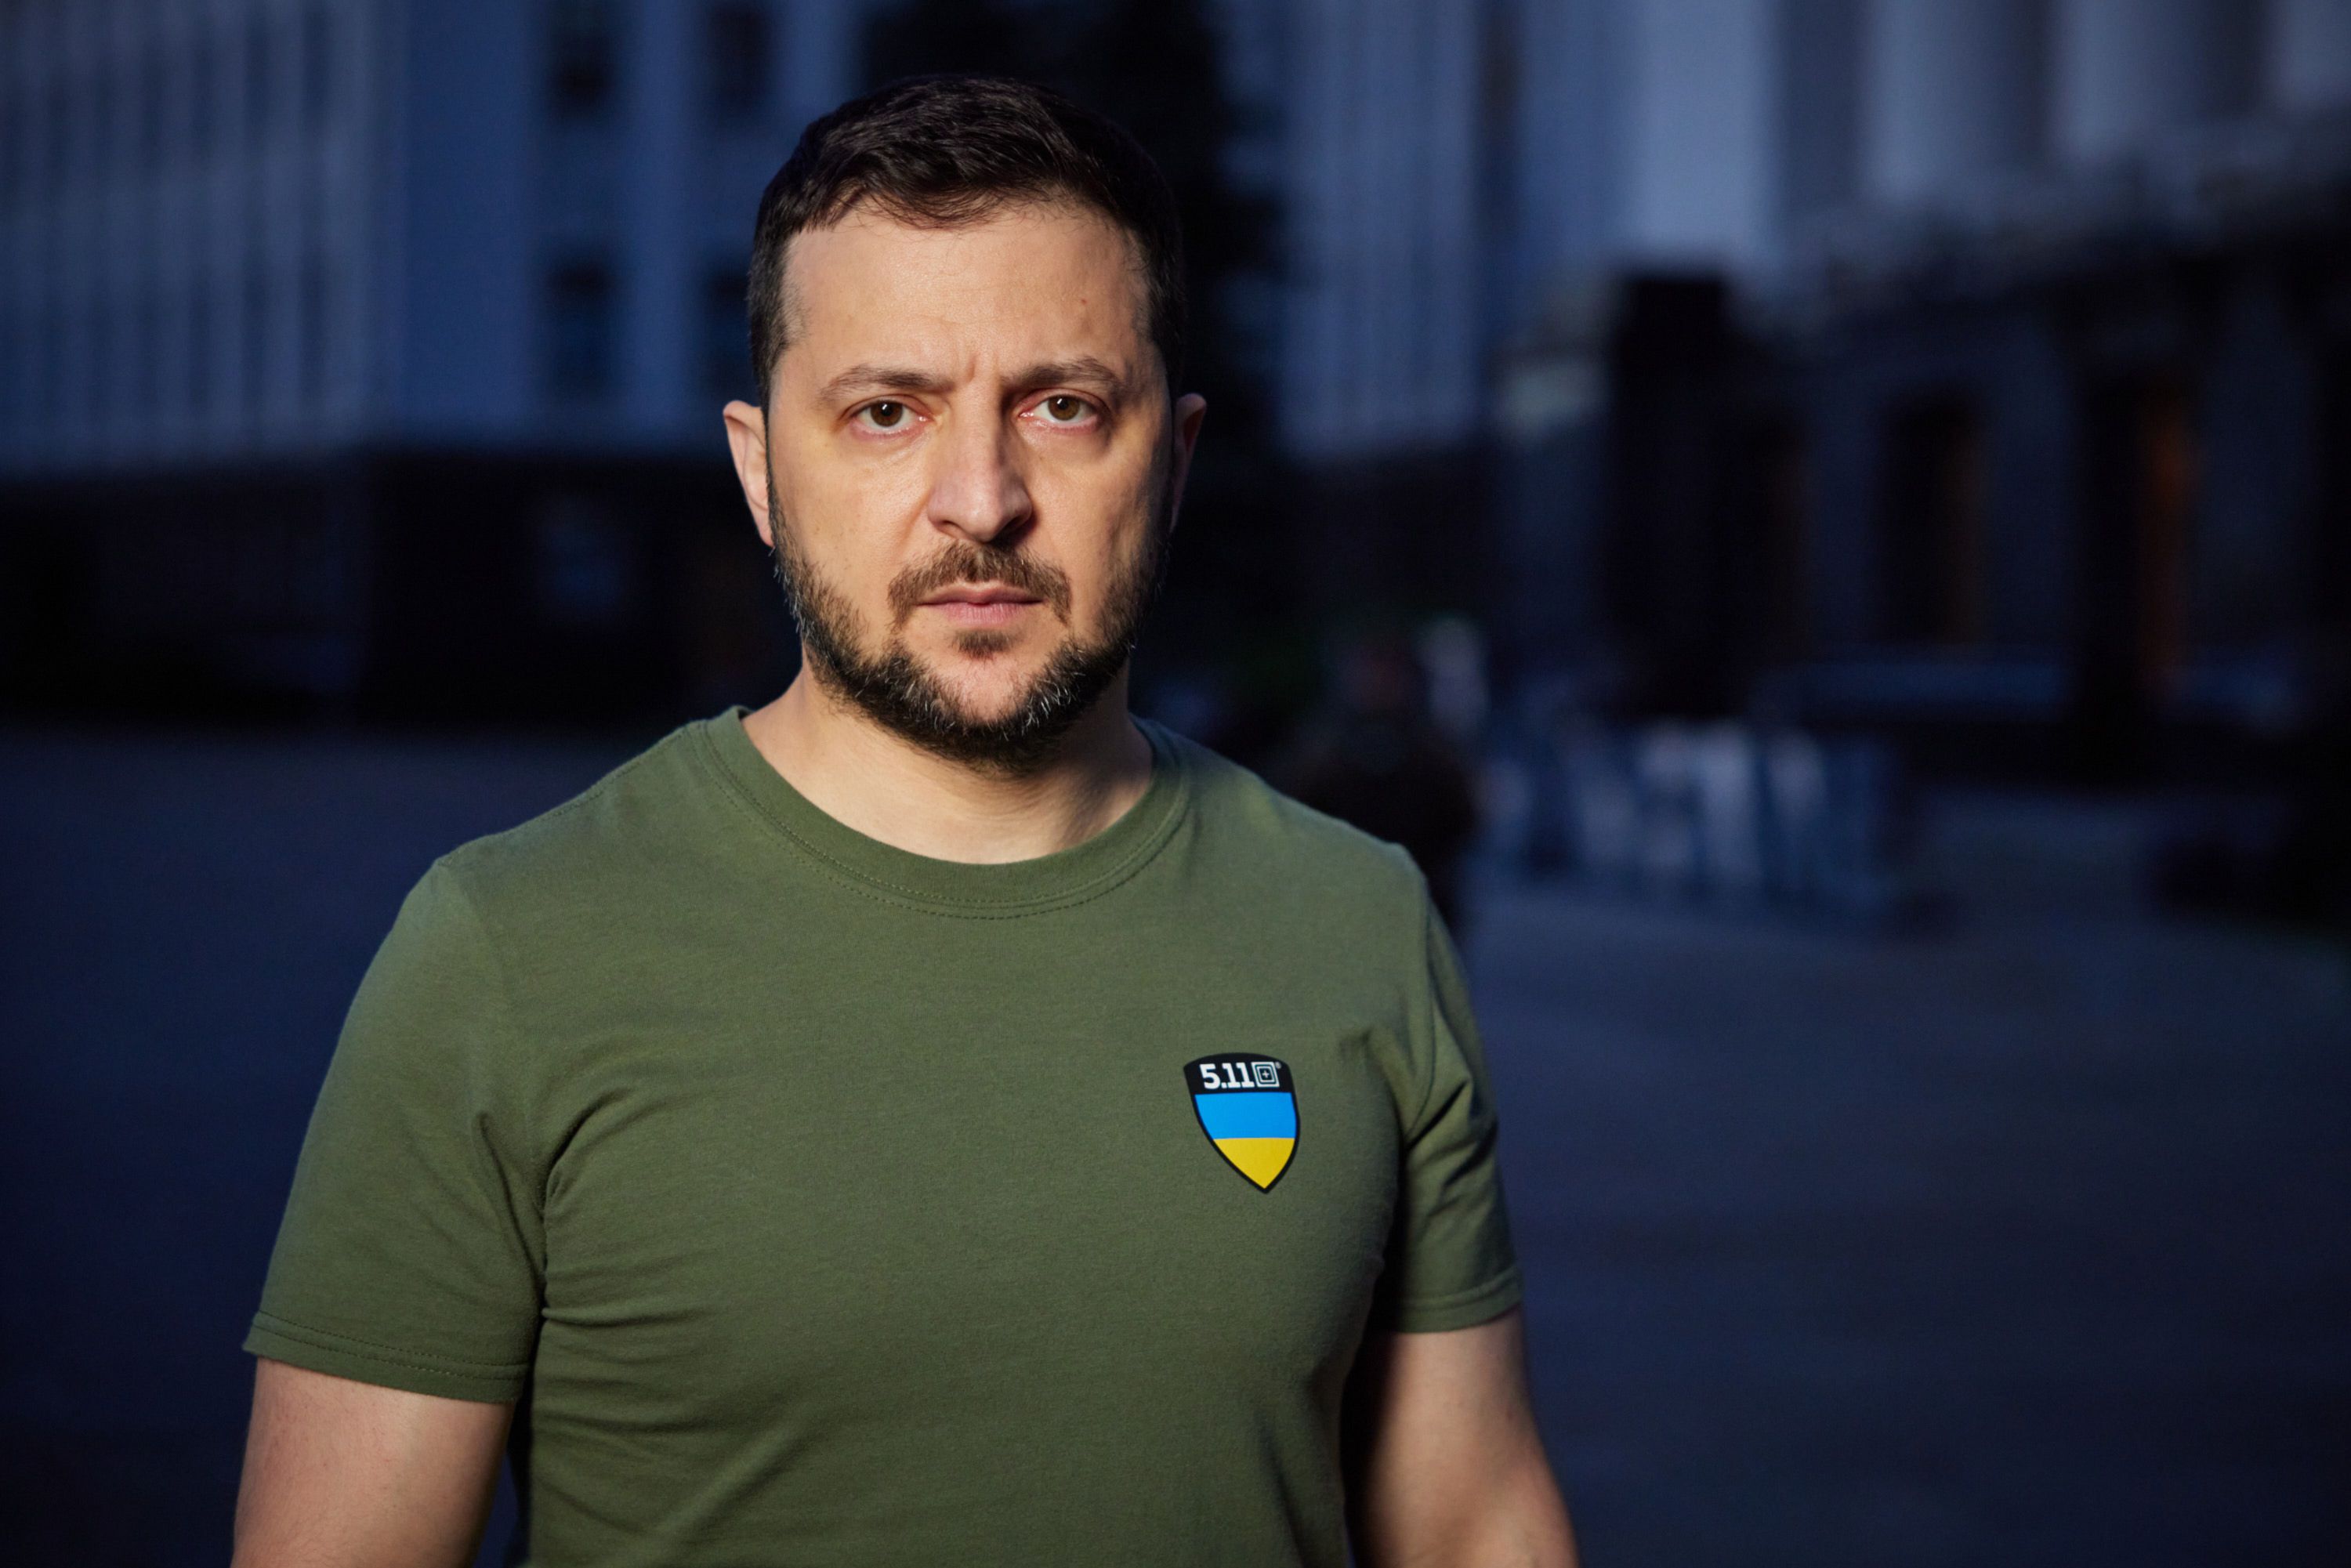 Ukraine's need for anti-missile systems remains - address by President Volodymyr Zelenskyy